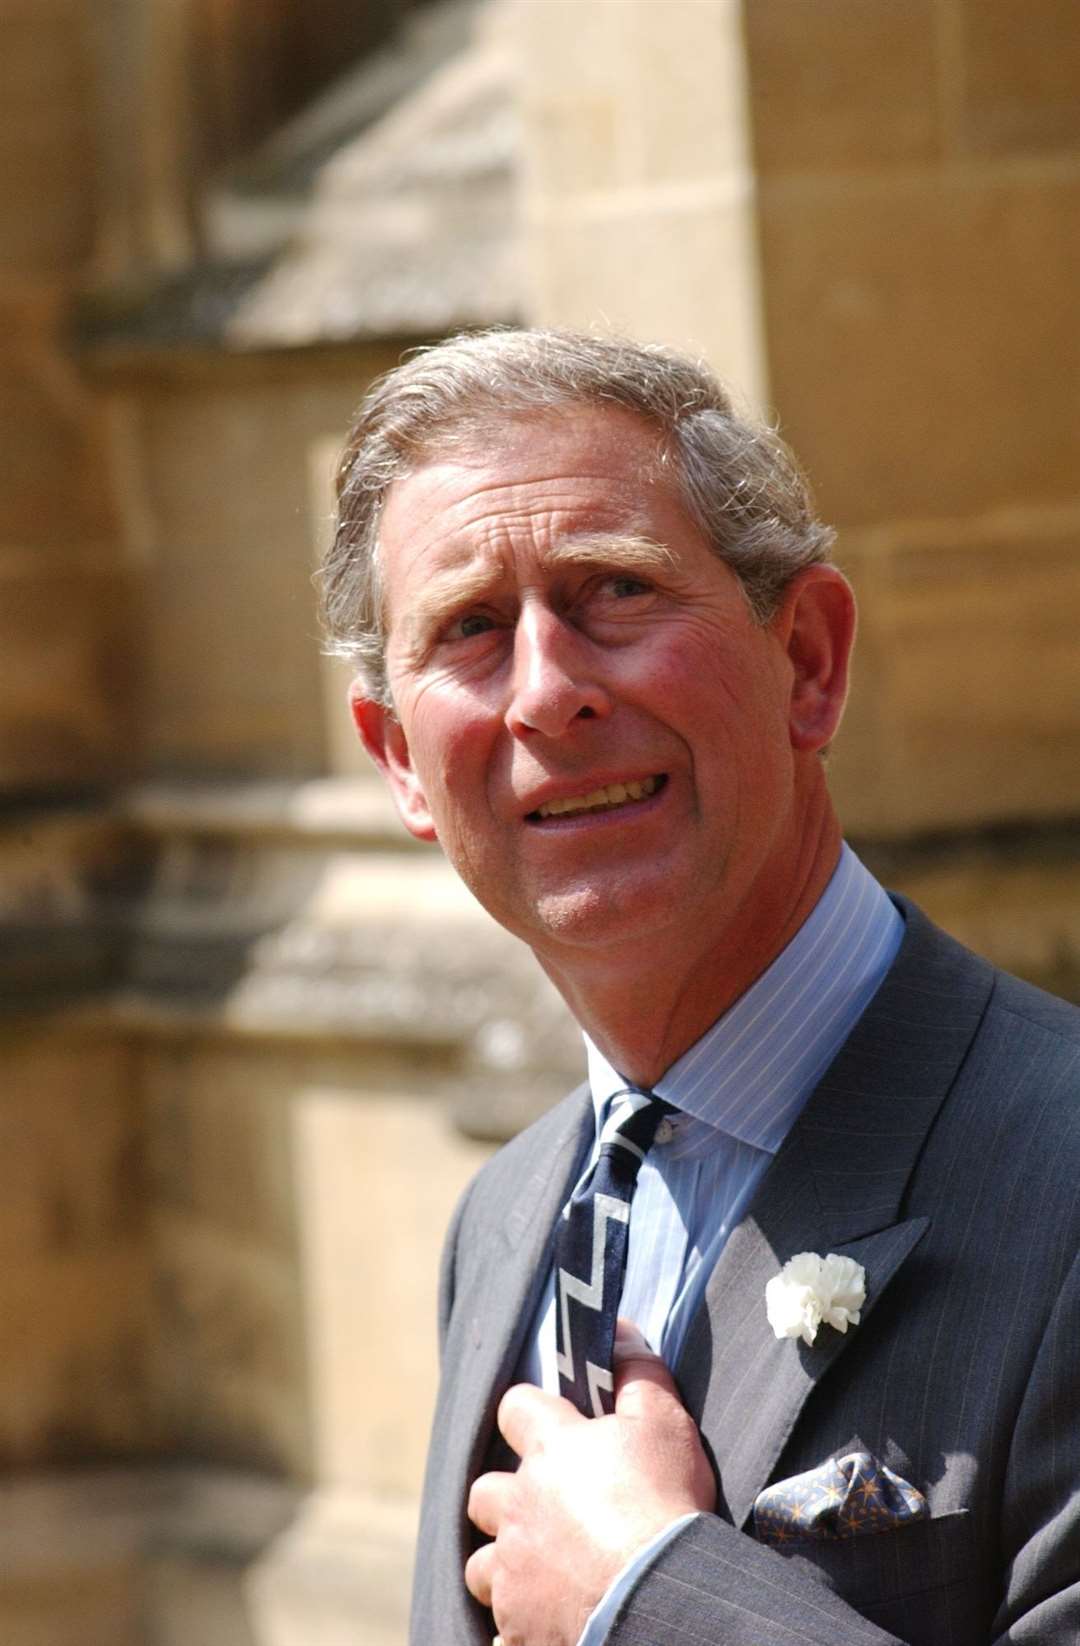 Plans for Newmarket’s celebrations to mark the Coronation of King Charles III are under way